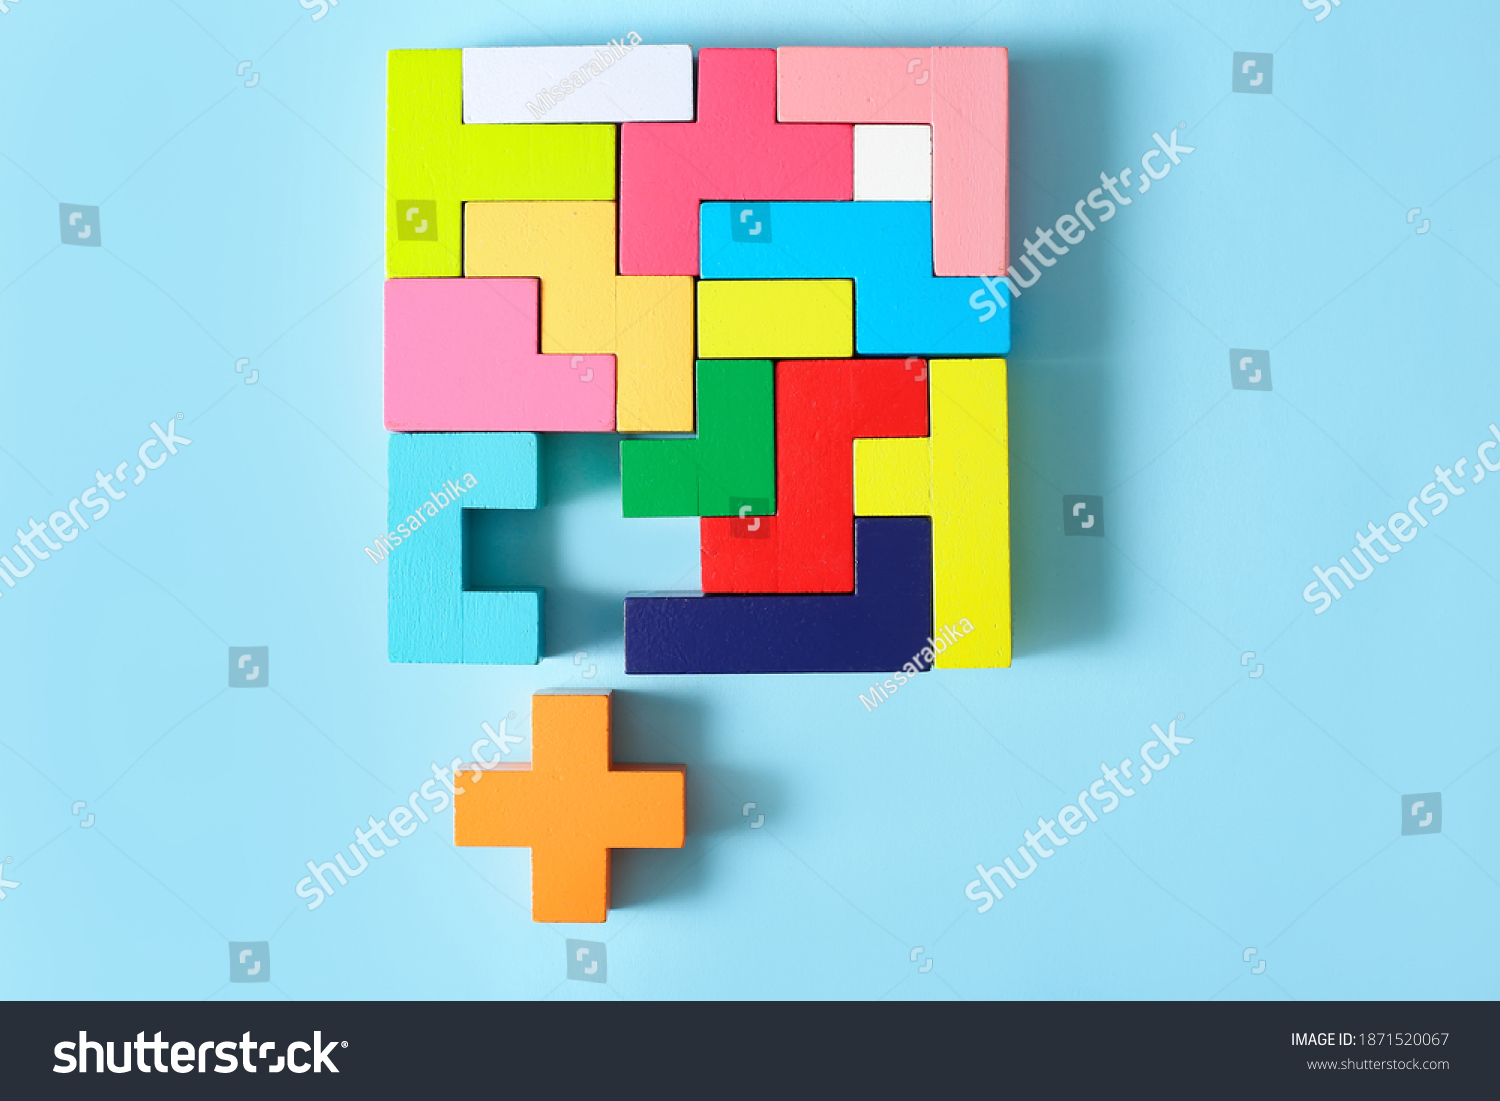 Concept of creative, logical thinking. Different colorful shapes wooden blocks on light background. Geometric shapes in different colors. Child development. Riddle and its solution. Logic tasks. #1871520067